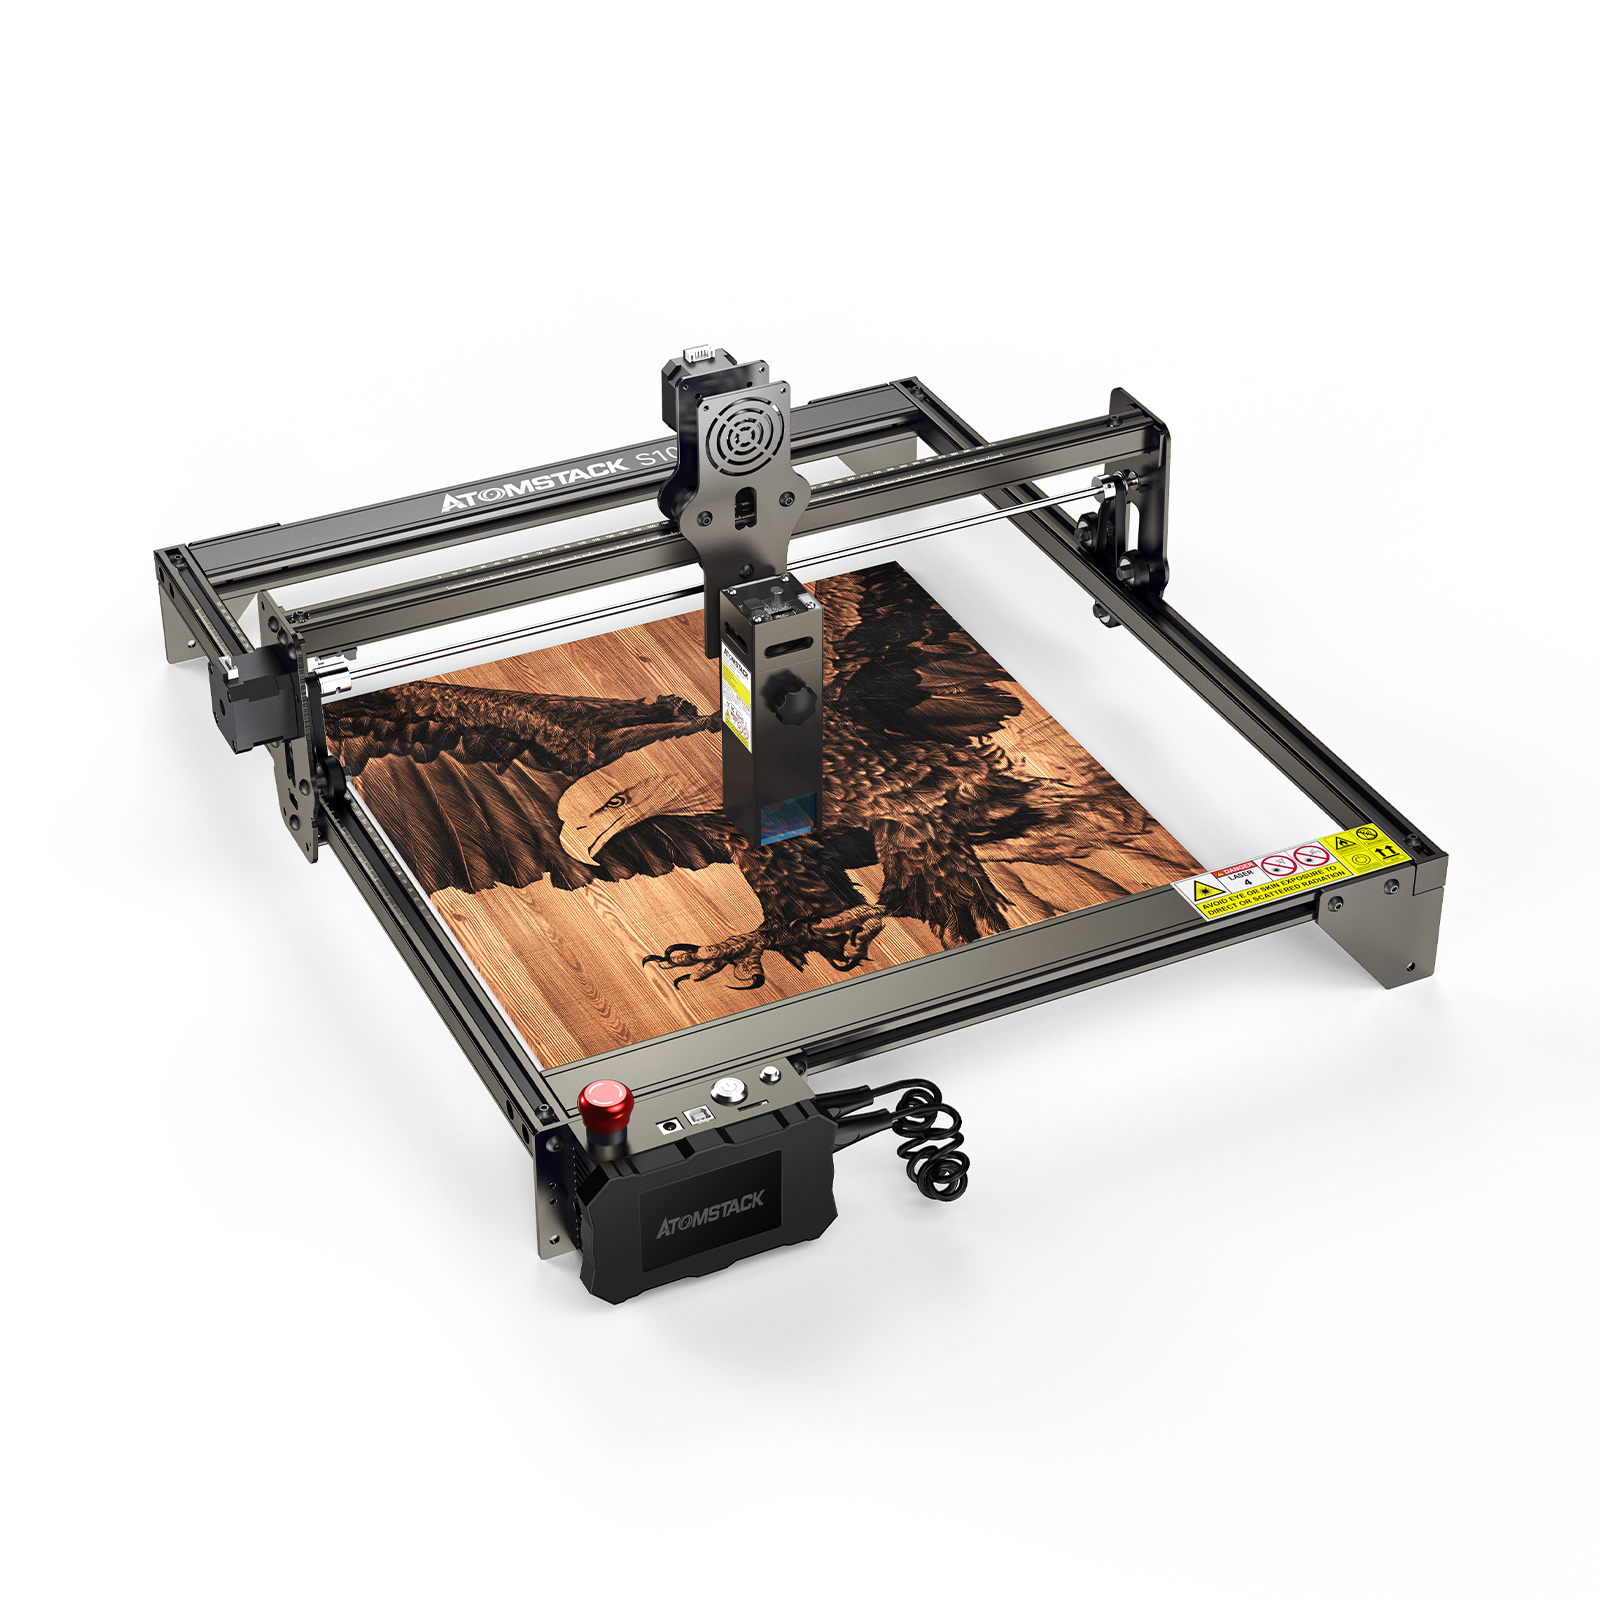 Find EU Direct ATOMSTACK S10 PRO Flagship Dual Laser Laser Engraving Cutting Machine Support Offline Engraving Laser Engraver 10W Output Power Fixed Focus 304 Mirror Stainless Steel Engraving Metal Wood Leather Acrylic DIY Engraver for Sale on Gipsybee.com with cryptocurrencies